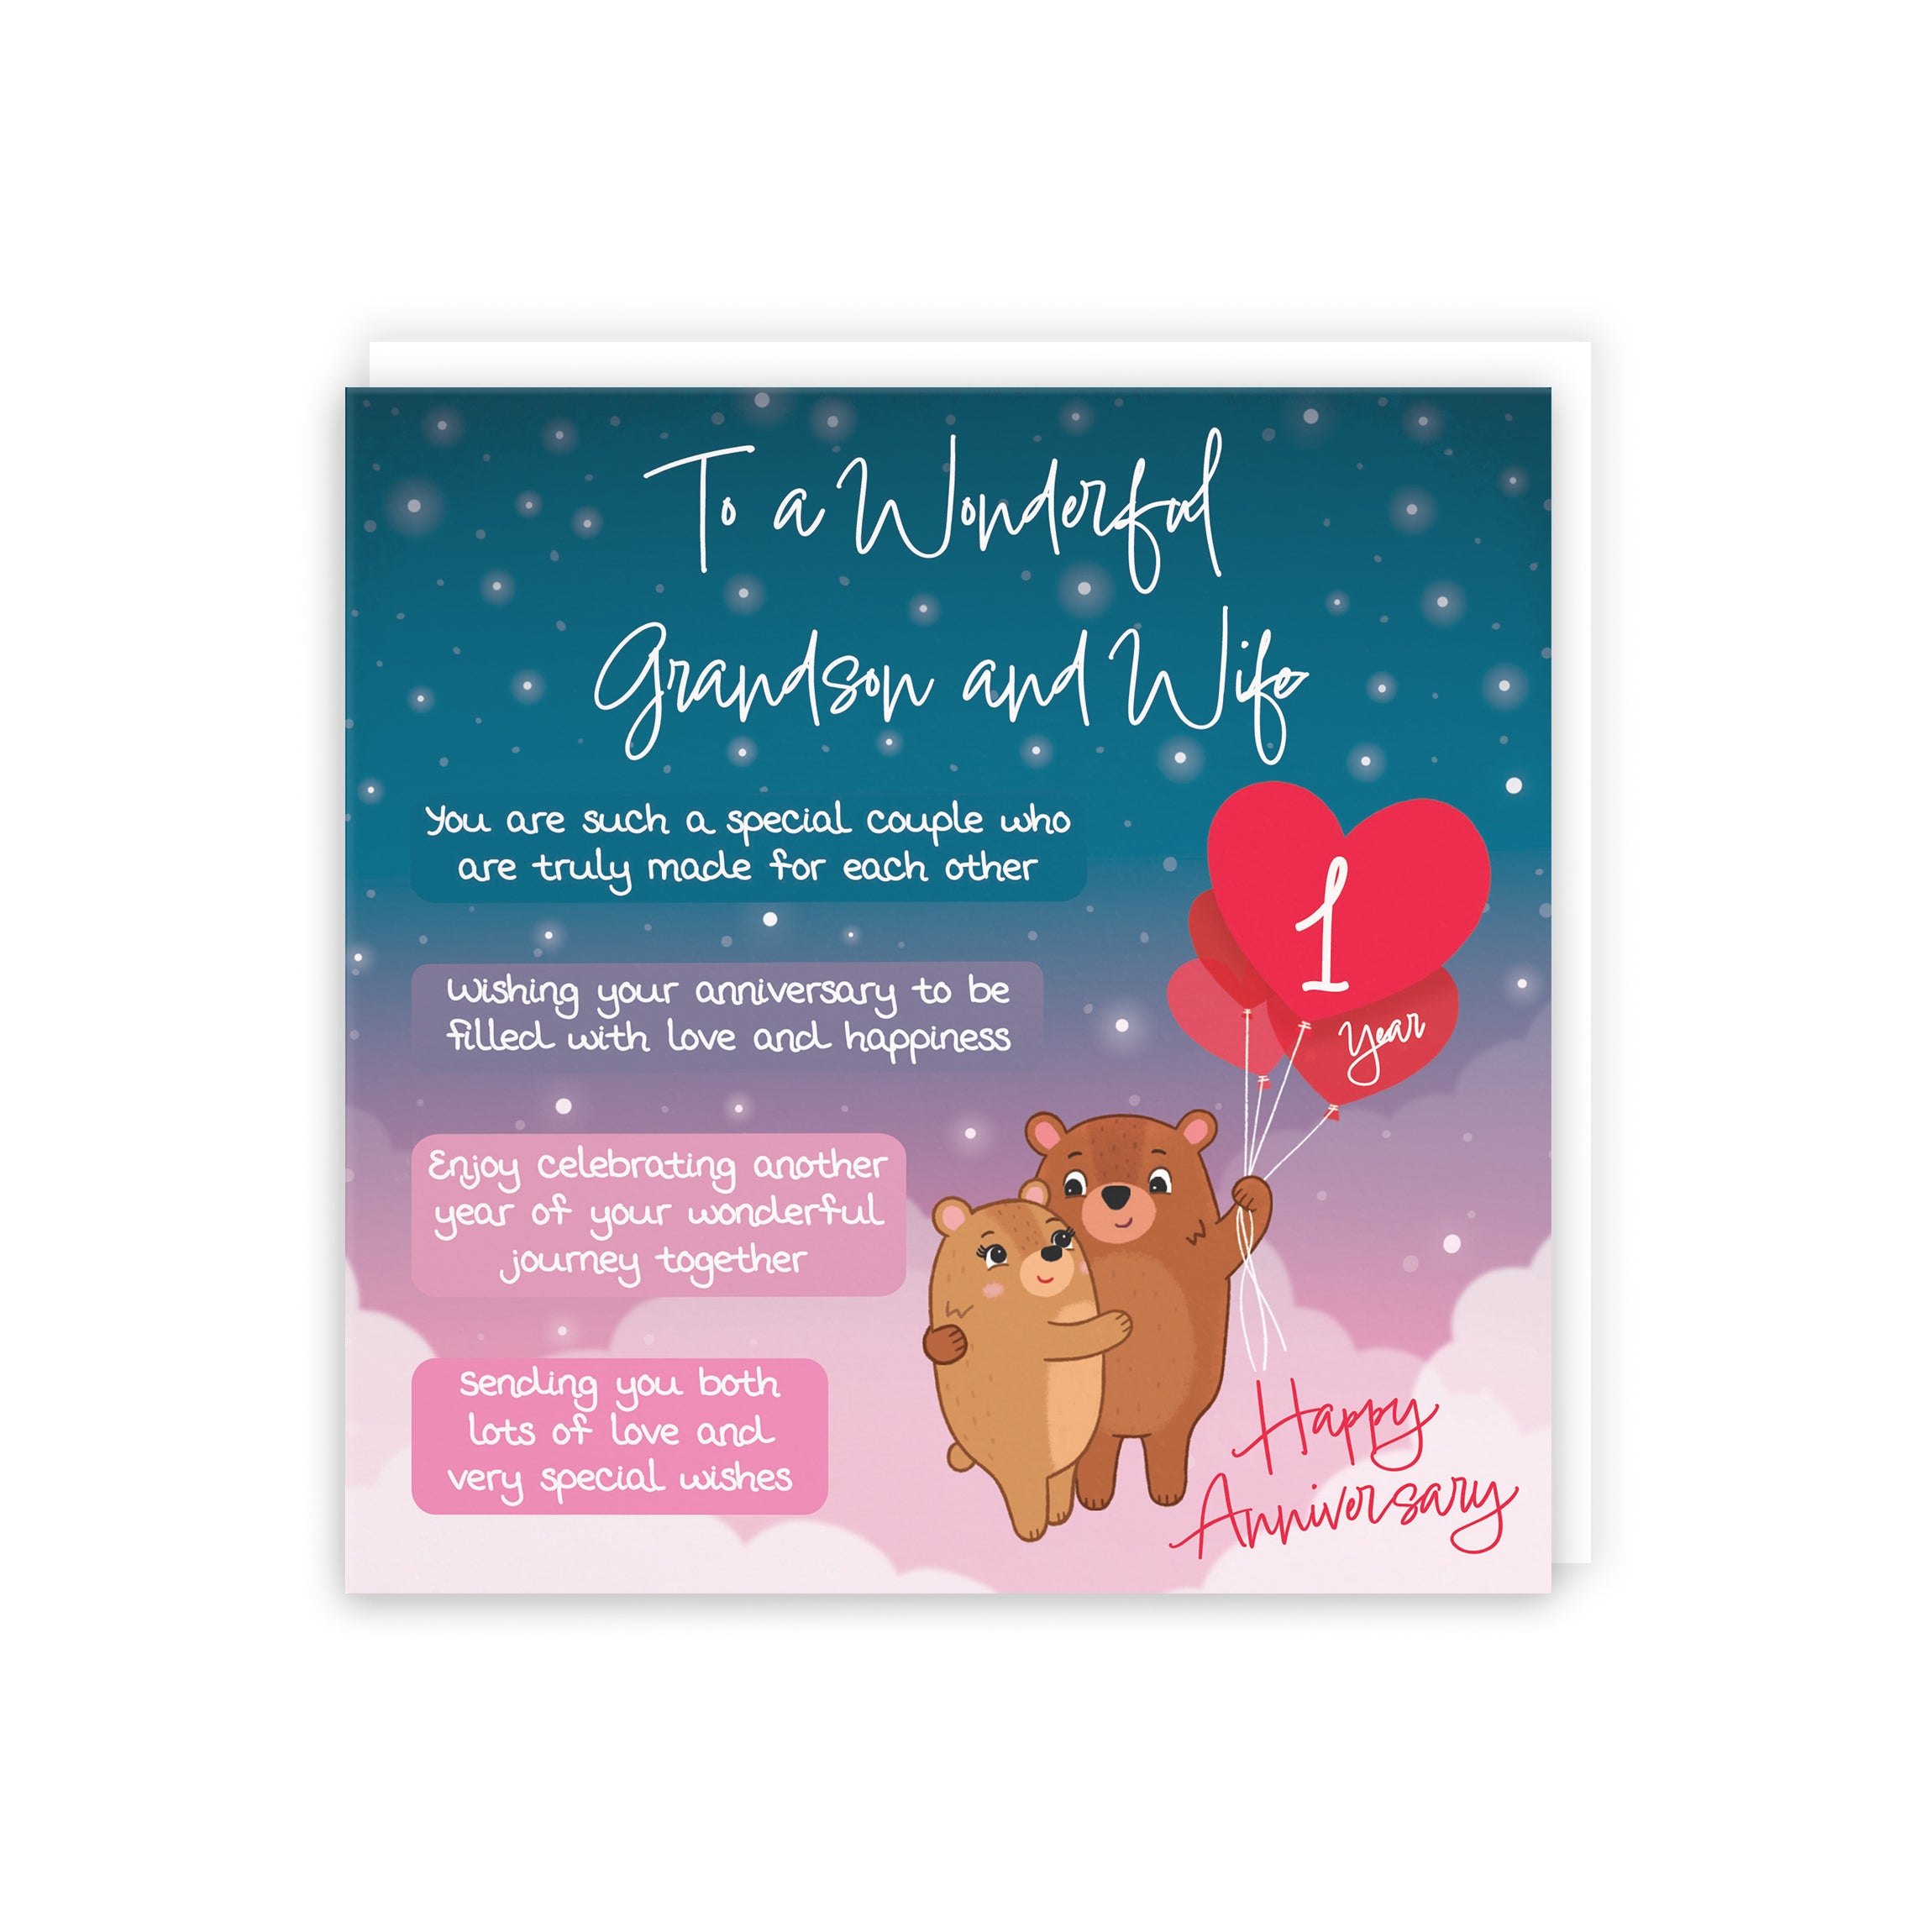 Grandson And Wife 1st Anniversary Card Starry Night Cute Bears